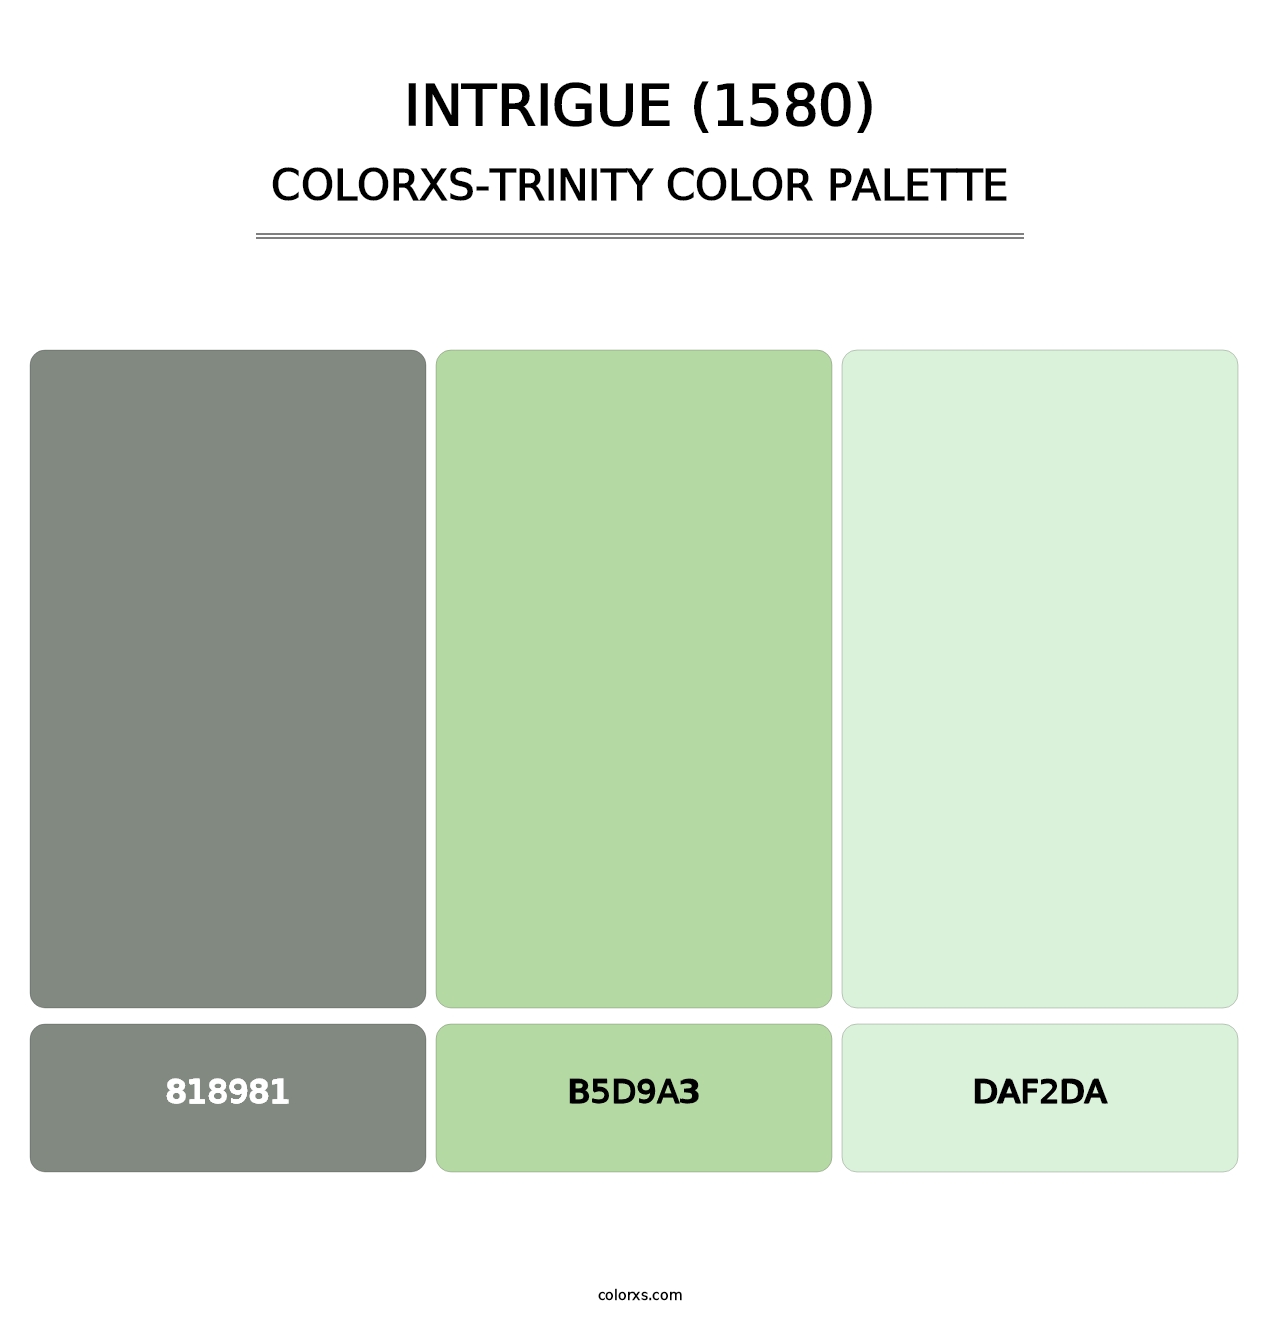 Intrigue (1580) - Colorxs Trinity Palette